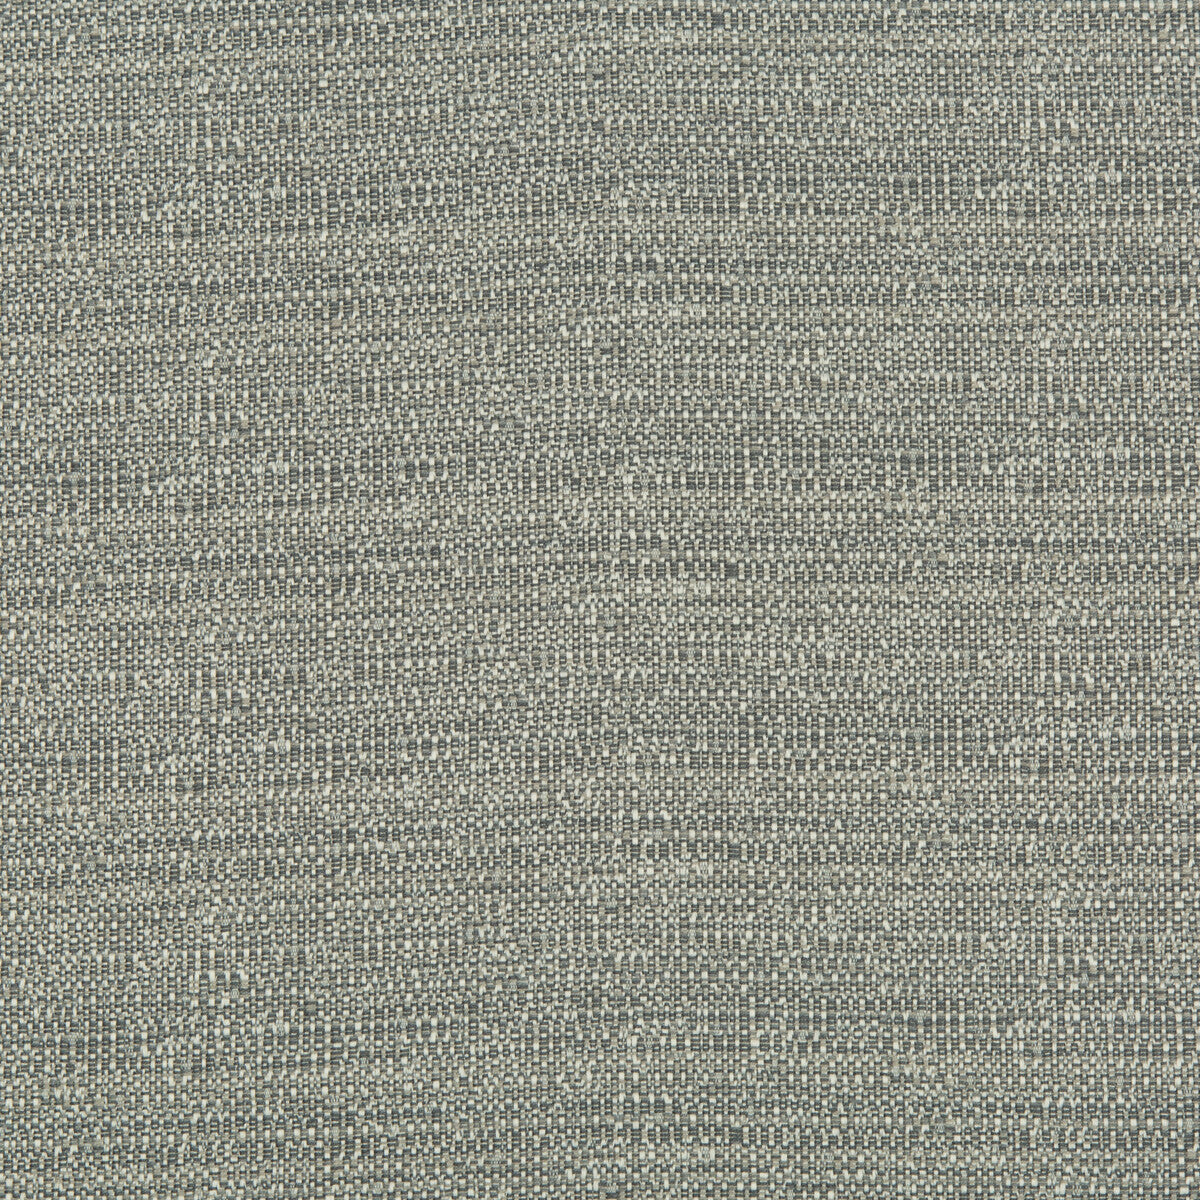 Kravet Design fabric in 35140-11 color - pattern 35140.11.0 - by Kravet Design in the Performance Crypton Home collection